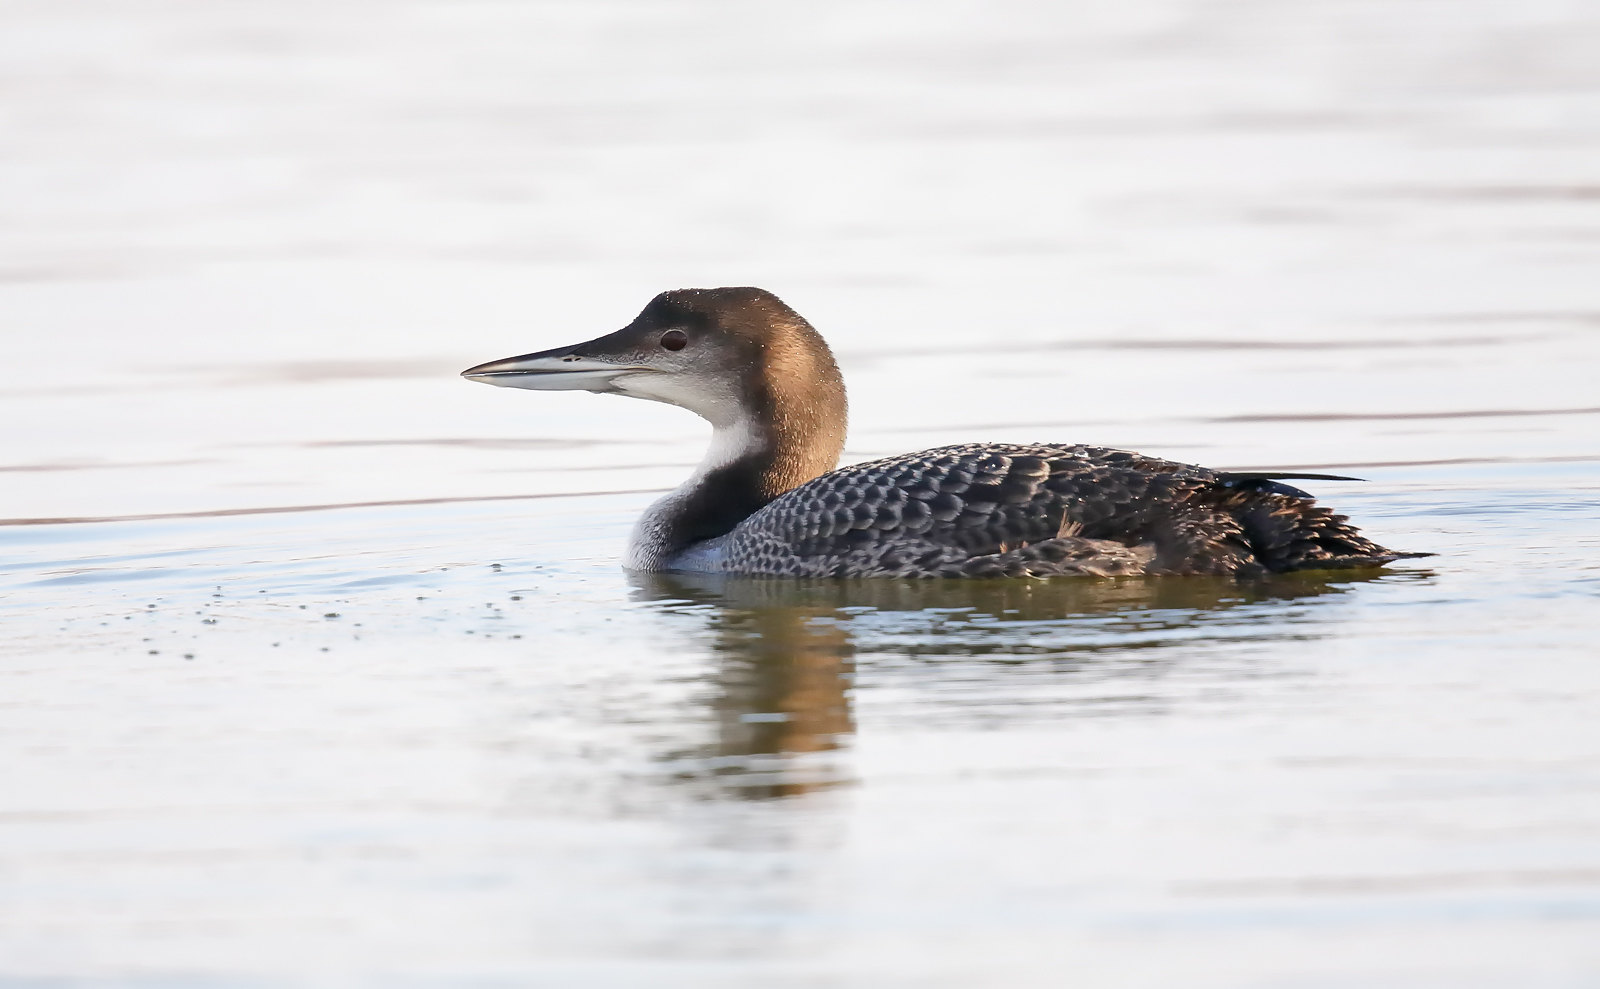 Juv. Great Northern Diver